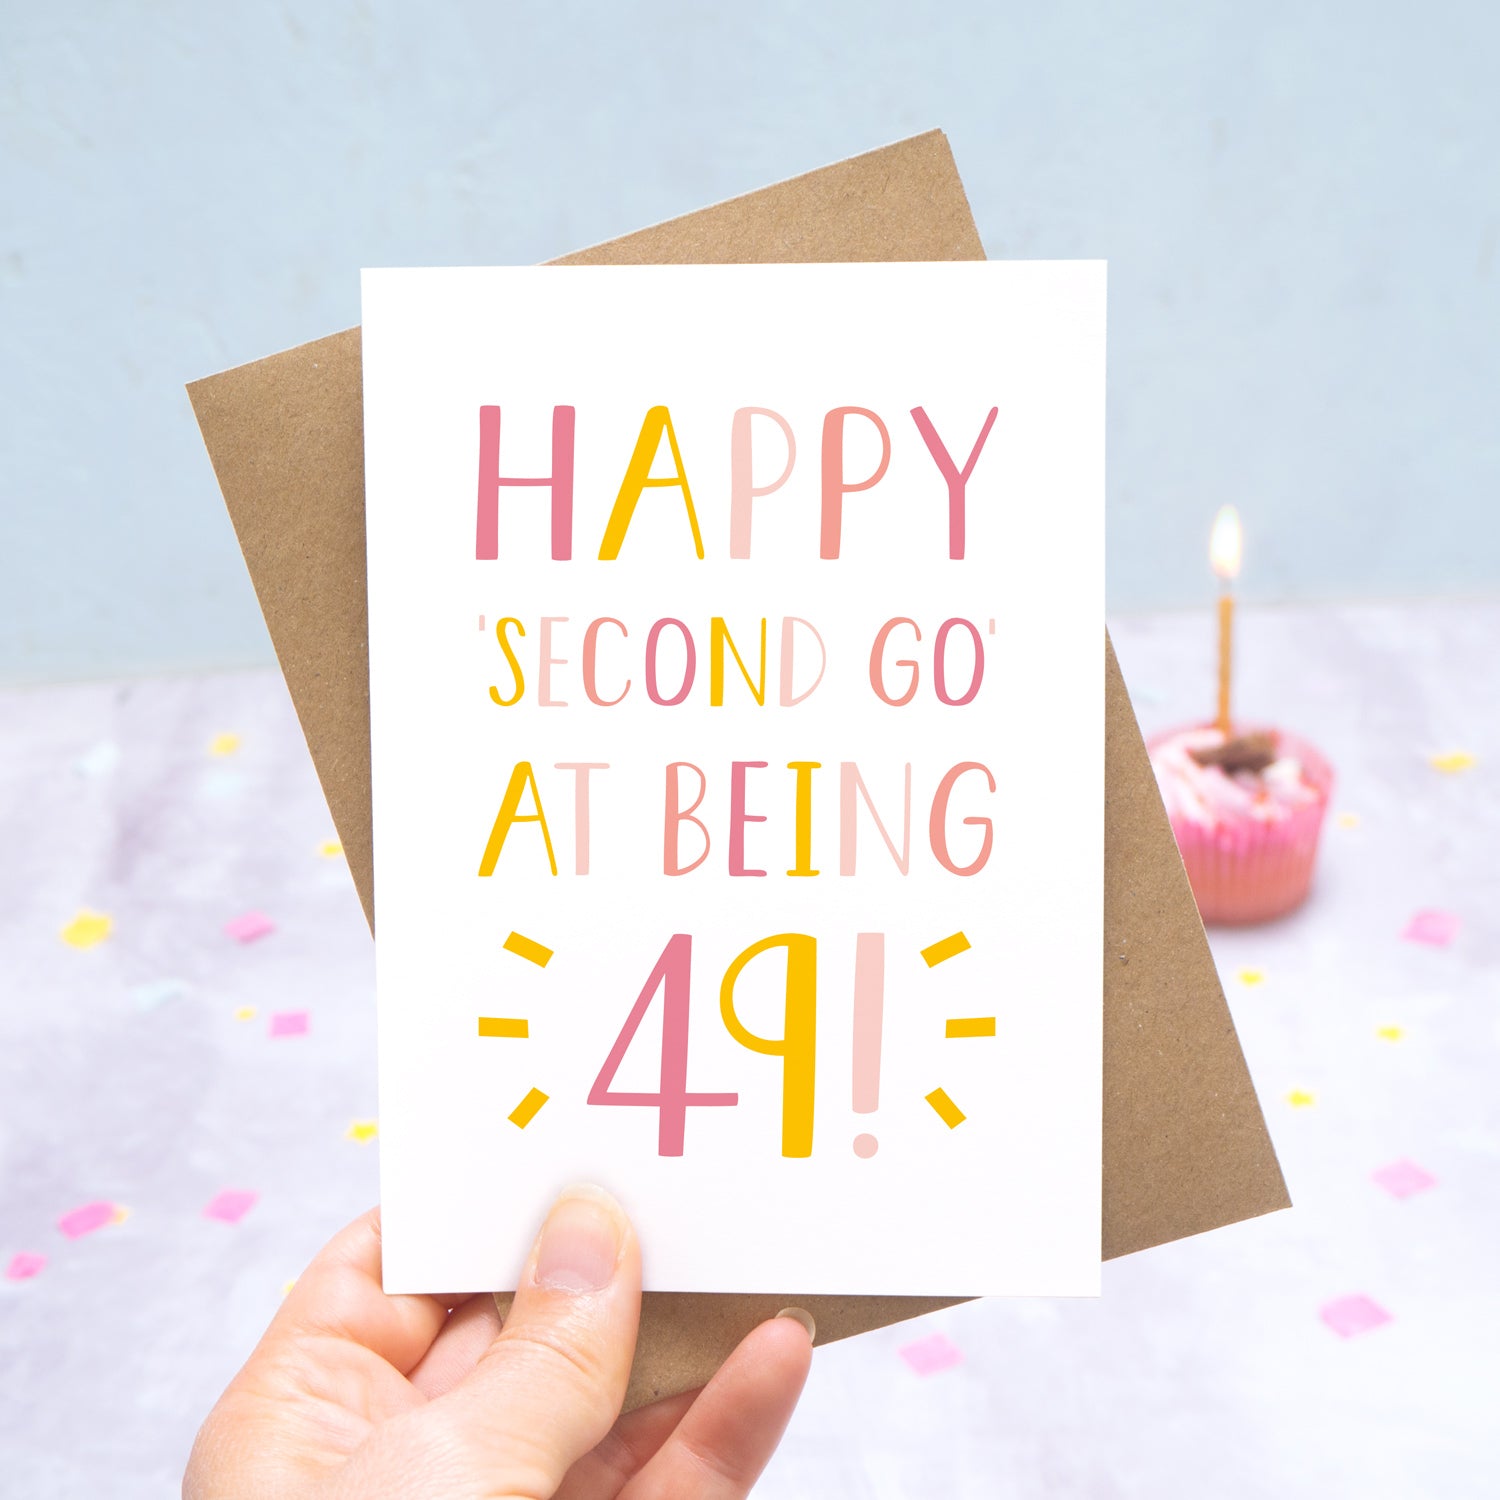 Happy second go at being 49 - milestone age card in pink photographed on a grey and blue background with a cupcake and burning candle.